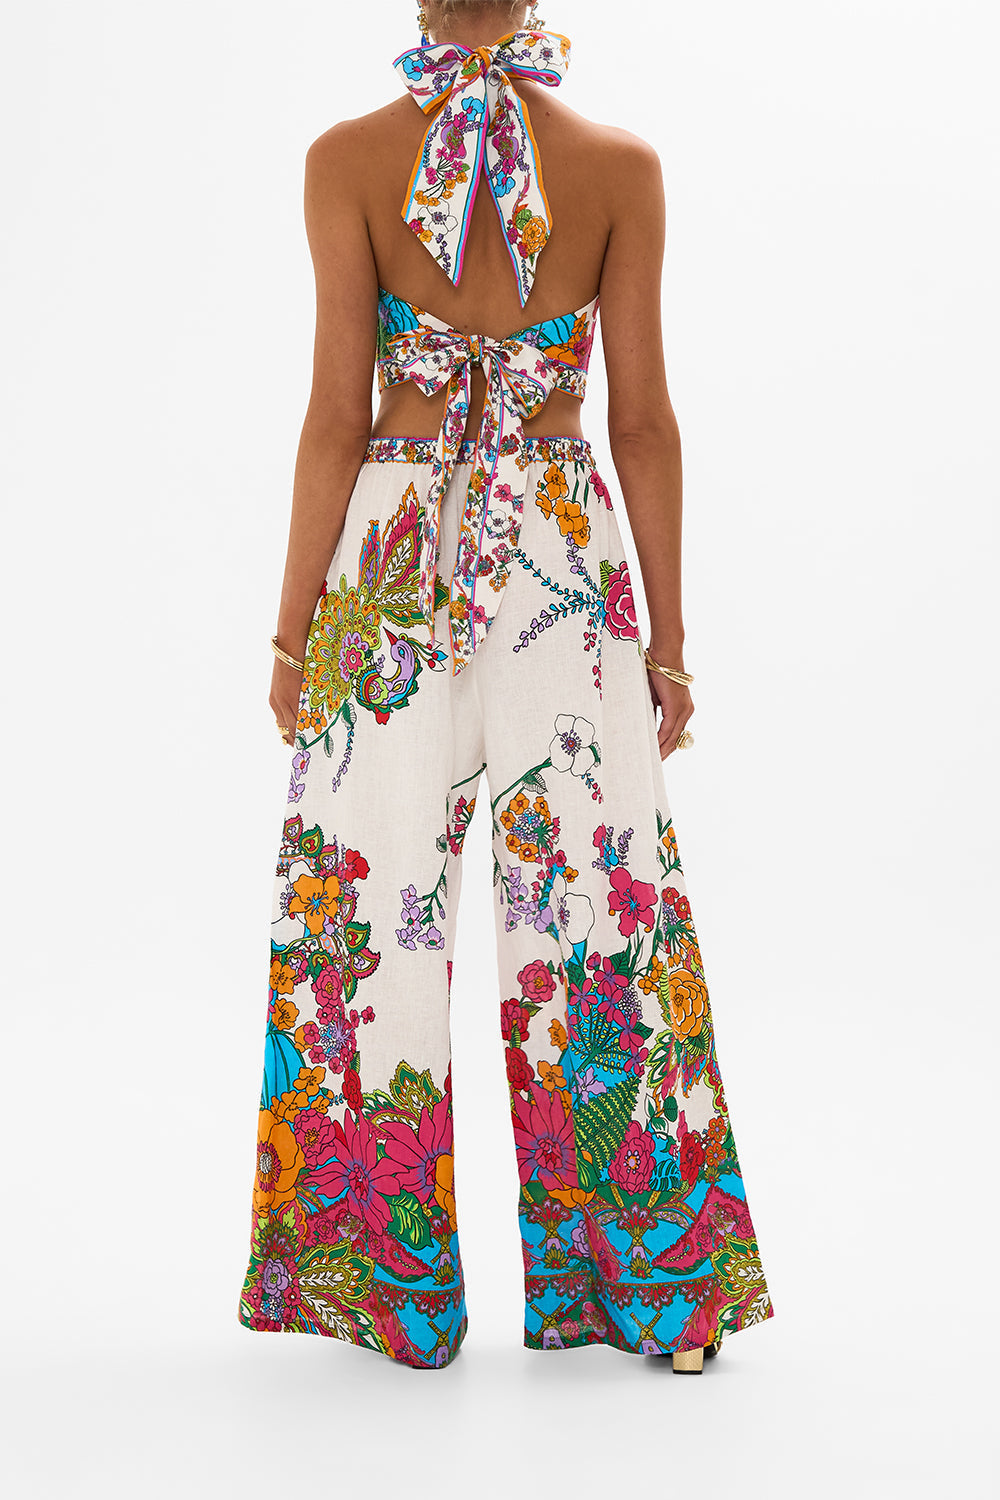 CAMILLA retro floral wide leg trouser with front pockets in Cosmic Prairie print.